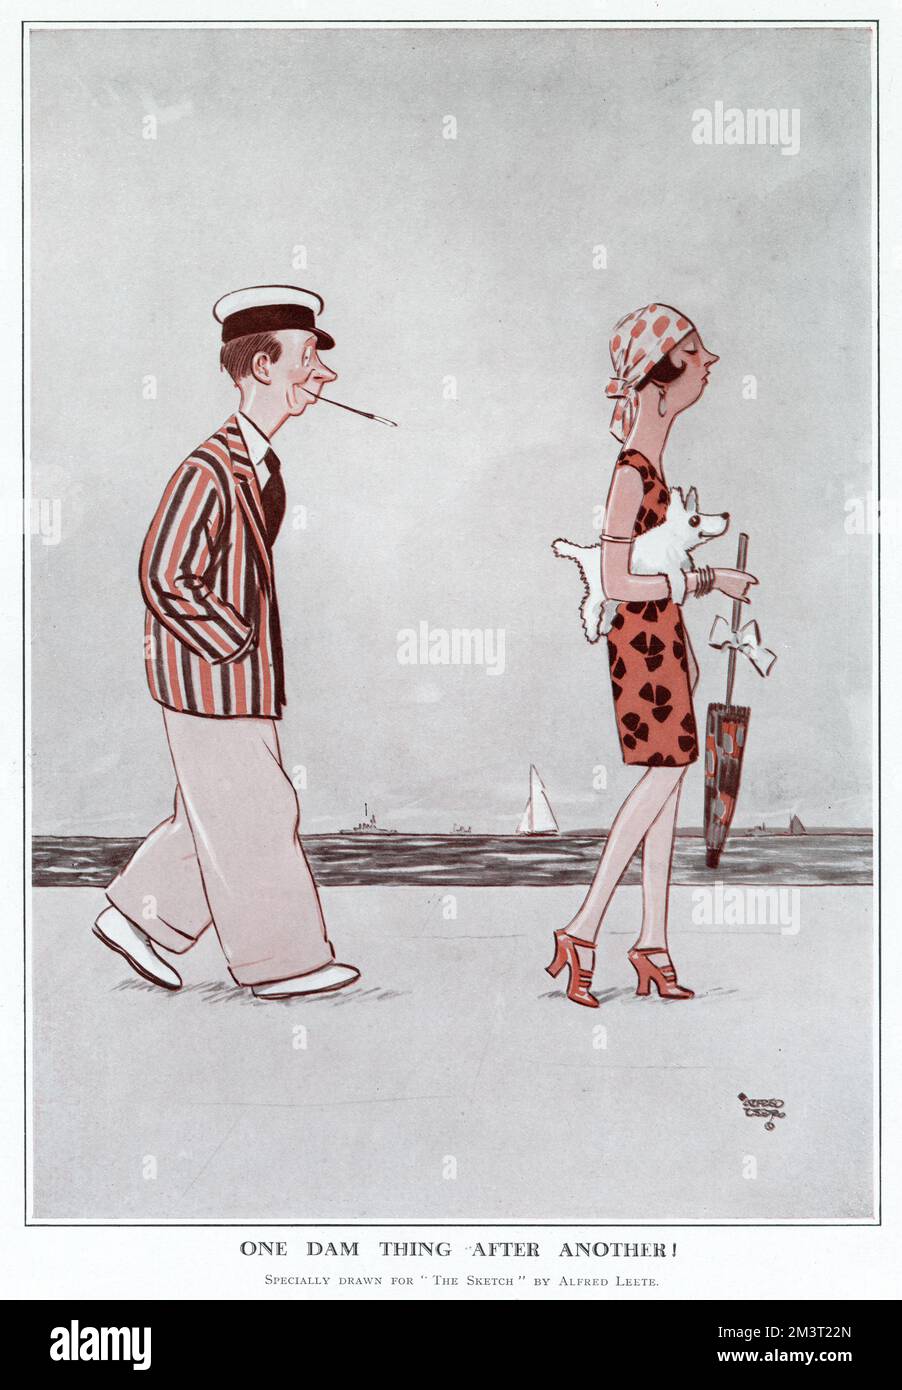 Cartoon by Alfred Leete showing a fashionable 1920s couple walking along a beach. The title refers to the popular Cochran revue of that year at the London Pavilion starring Edythe Baker, Sonnie Hale and Jessie Matthews. Stock Photo